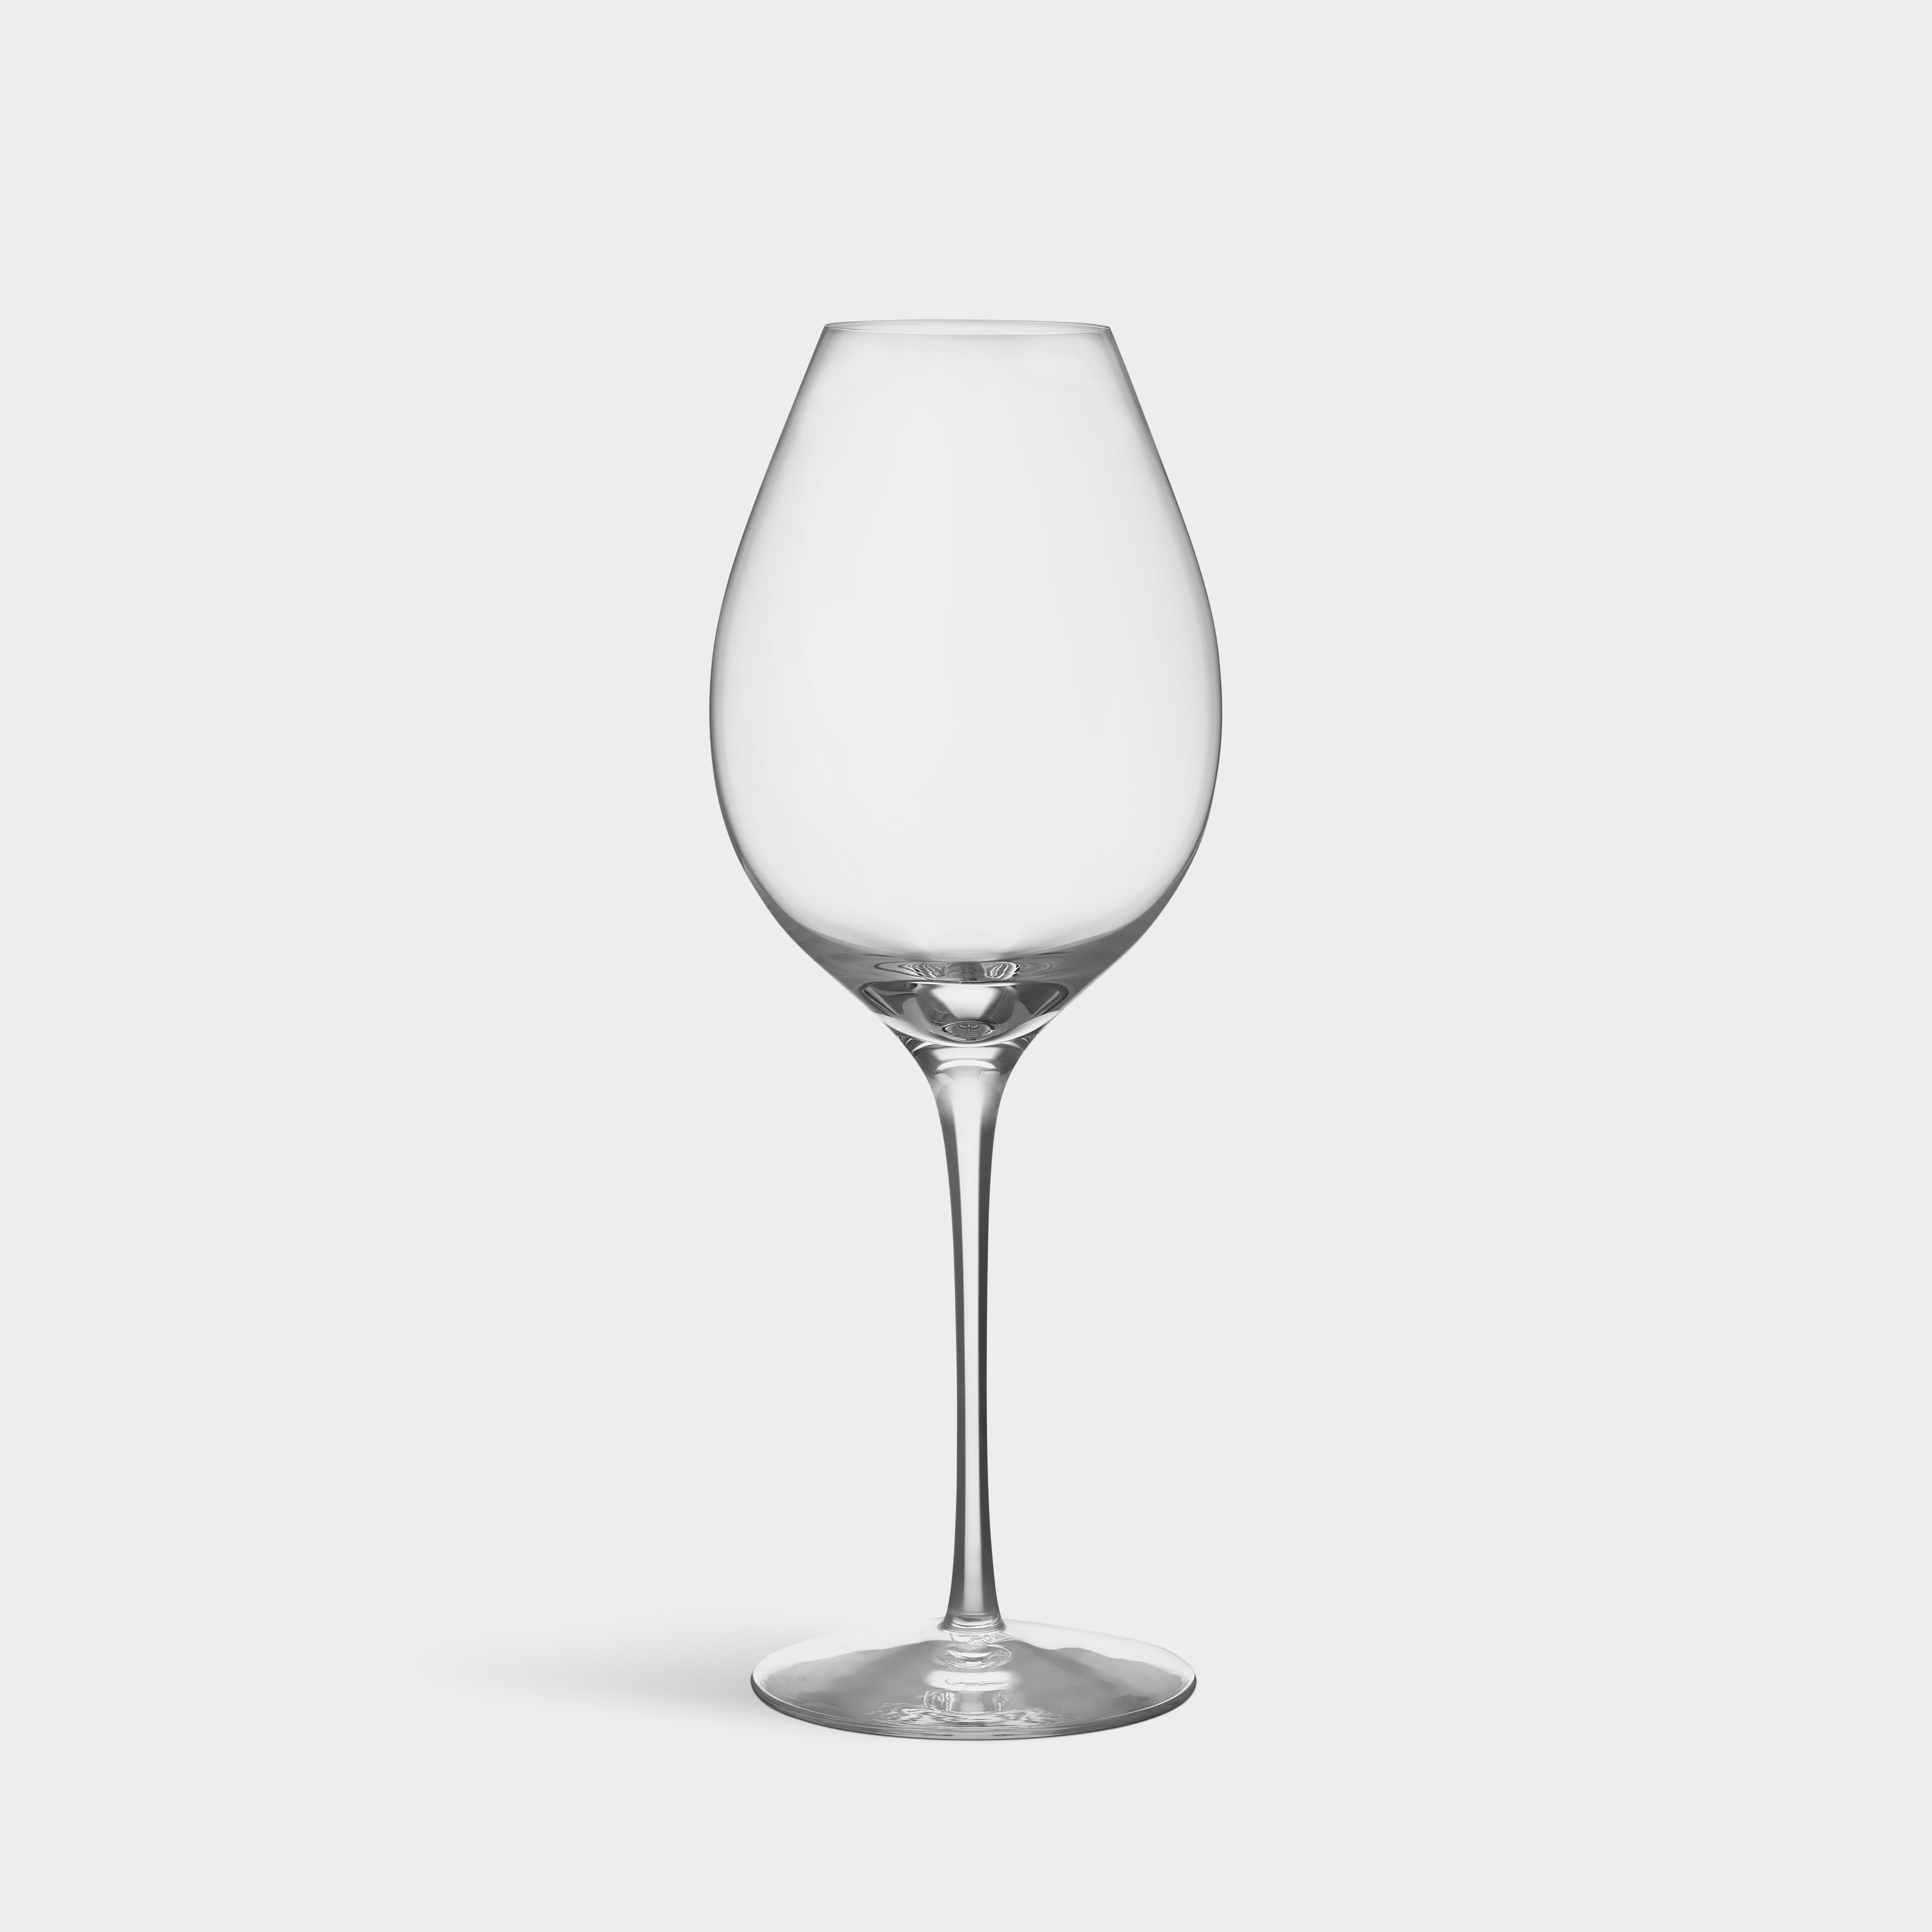 Difference Primeur from Orrefors holds 21 oz and is a wine glass suited for young red wines characterized by the nature of the grape and berry-forward freshness. The bowl allows young aromas to develop with plenty of volume for air. Difference